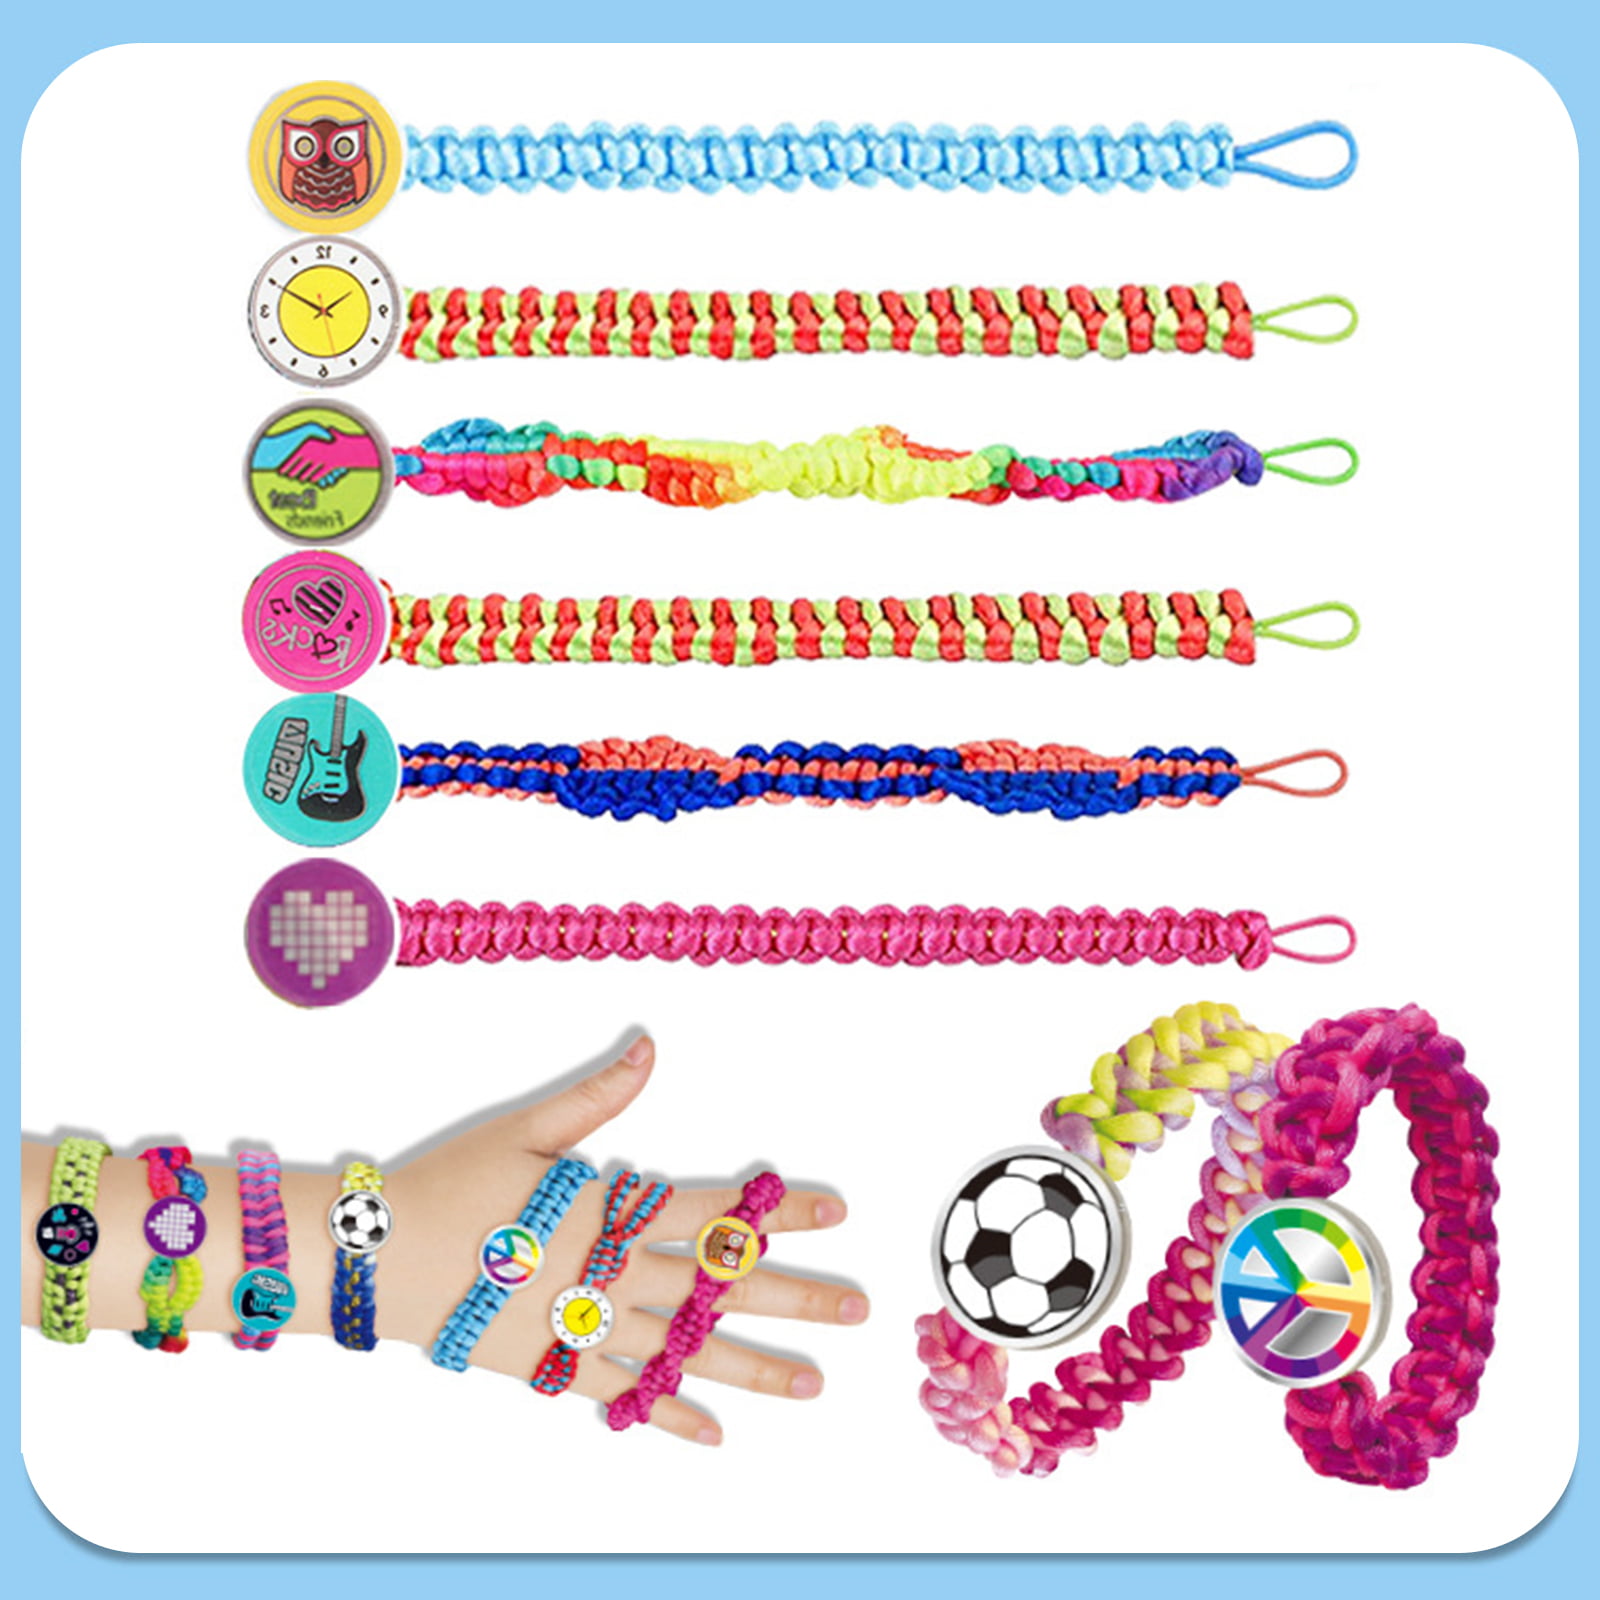 Friendship Bracelet Making Kit for Girls Arts and Crafts Jewelry Making Tool for Ages 8-12 Teen Girl Gifts 6 7 8 9 10 11 12 Year Old Girls Gifts Toys 